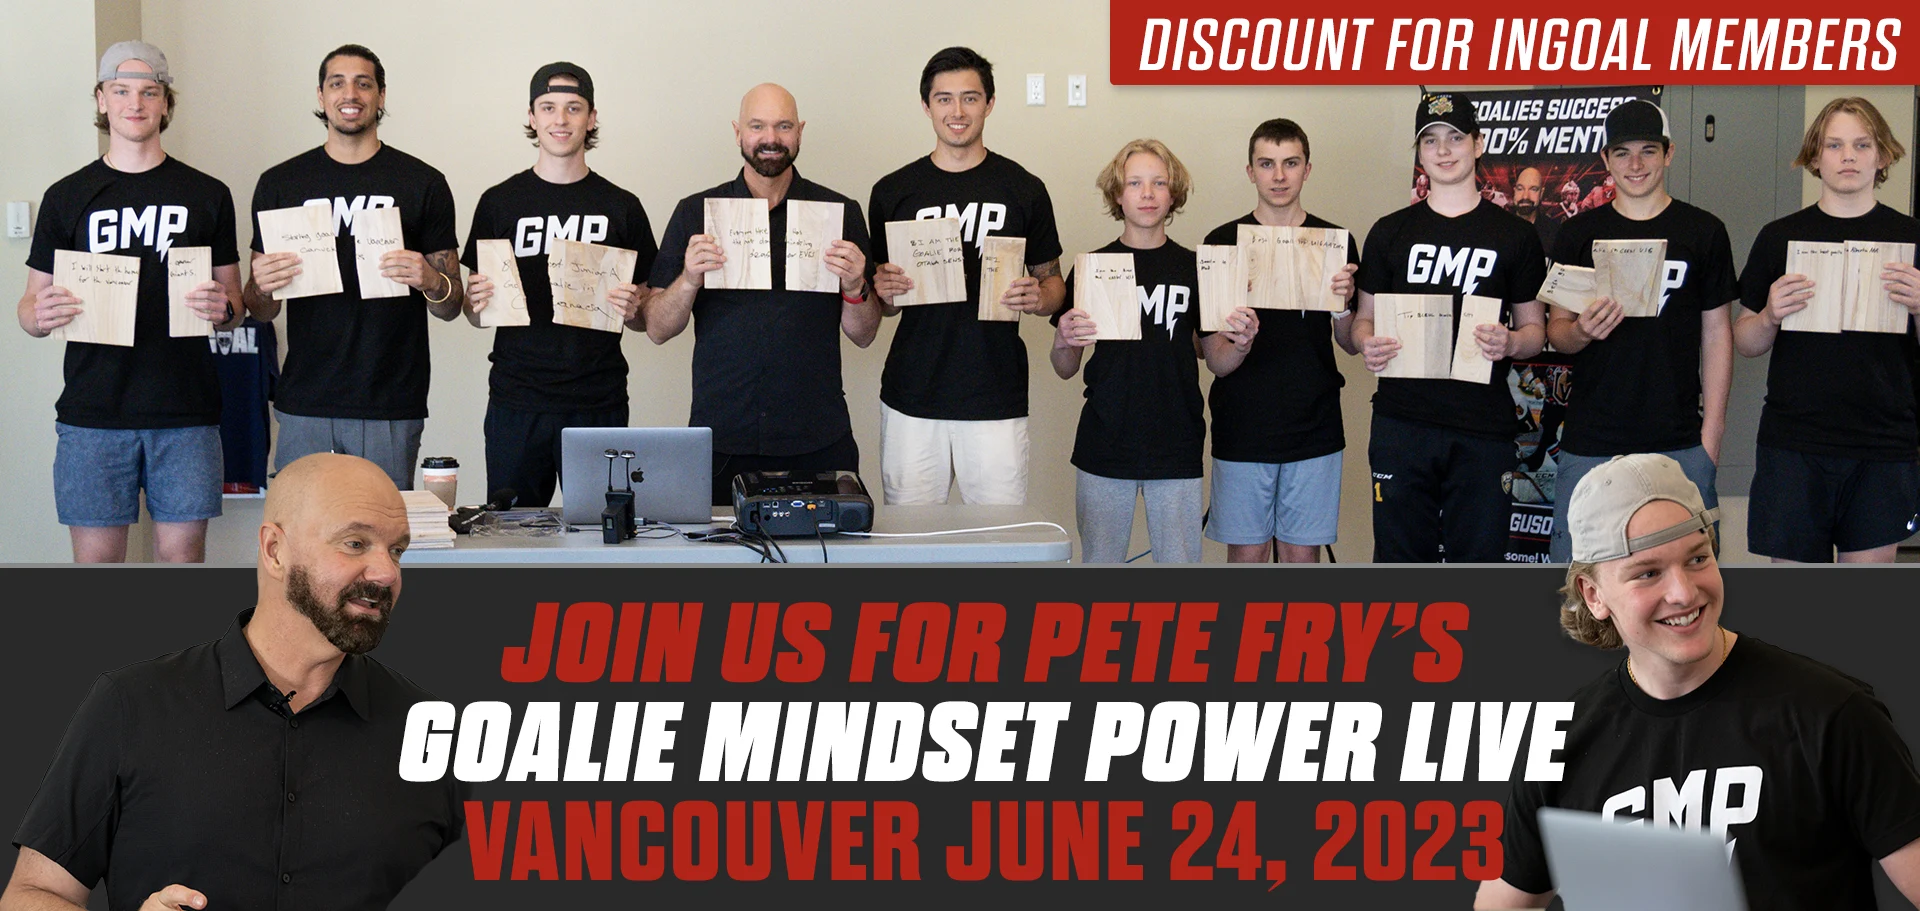 InGoal and Pete Fry present Goalie Mindset Power June 24, 2023 in Vancouver